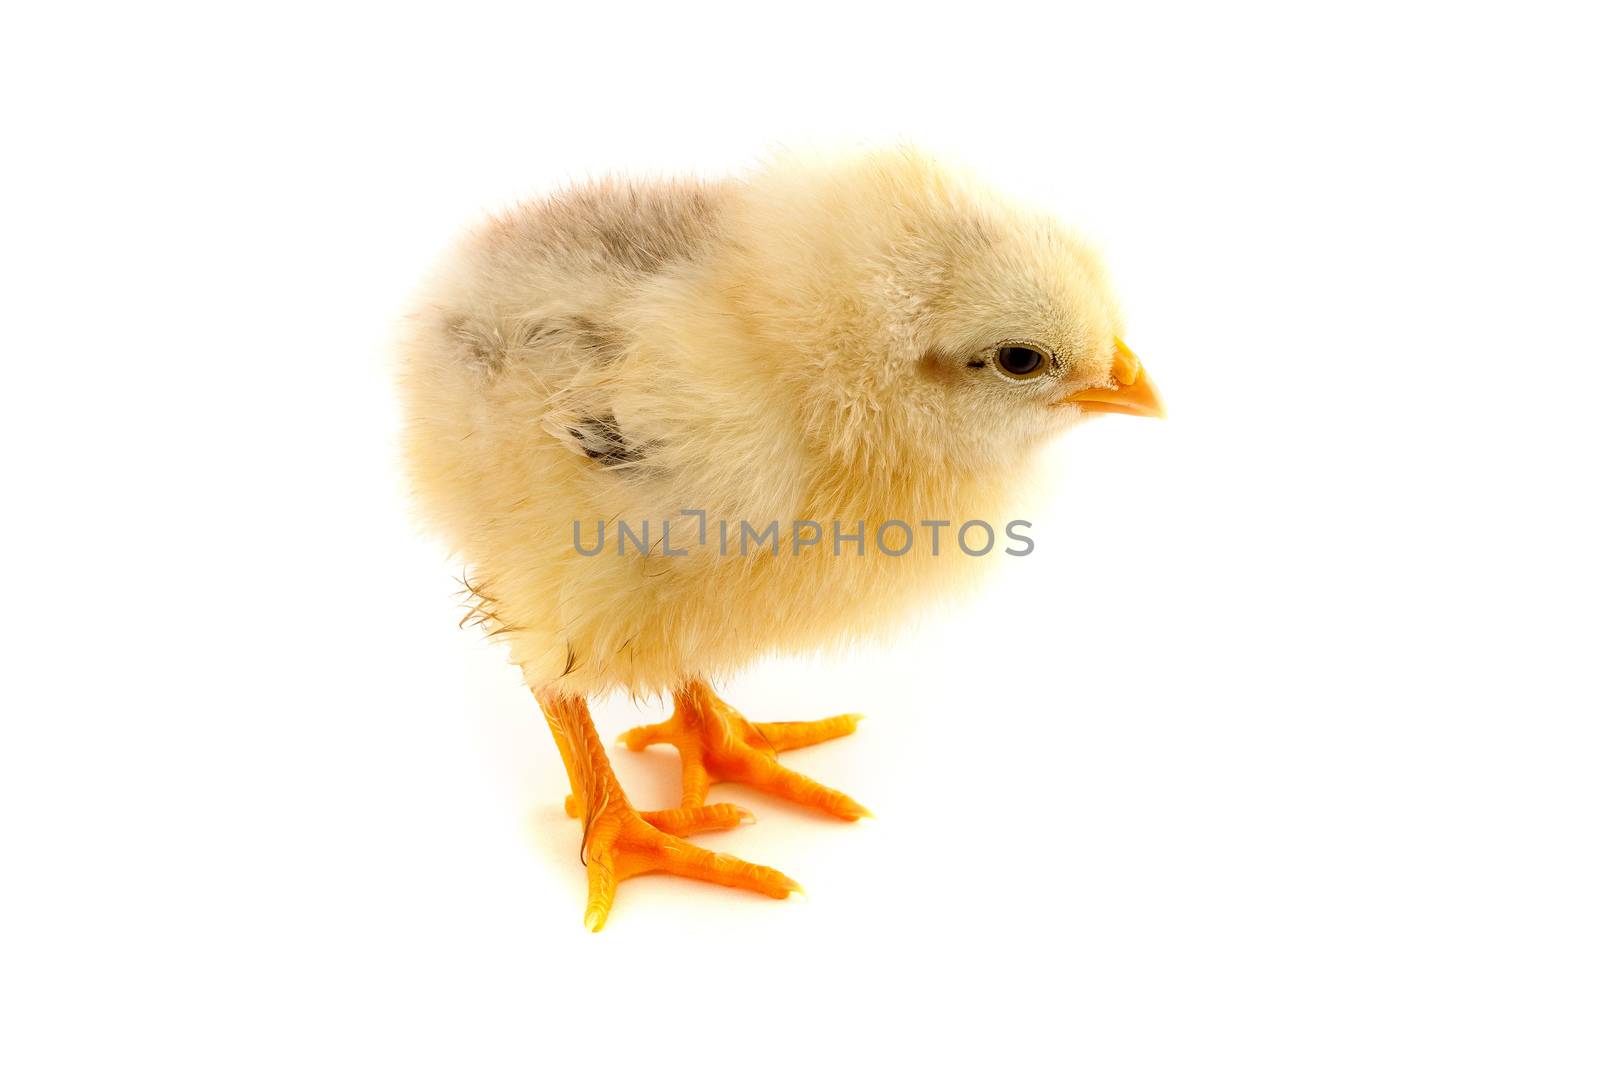 The yellow chick on a white background by bloodua